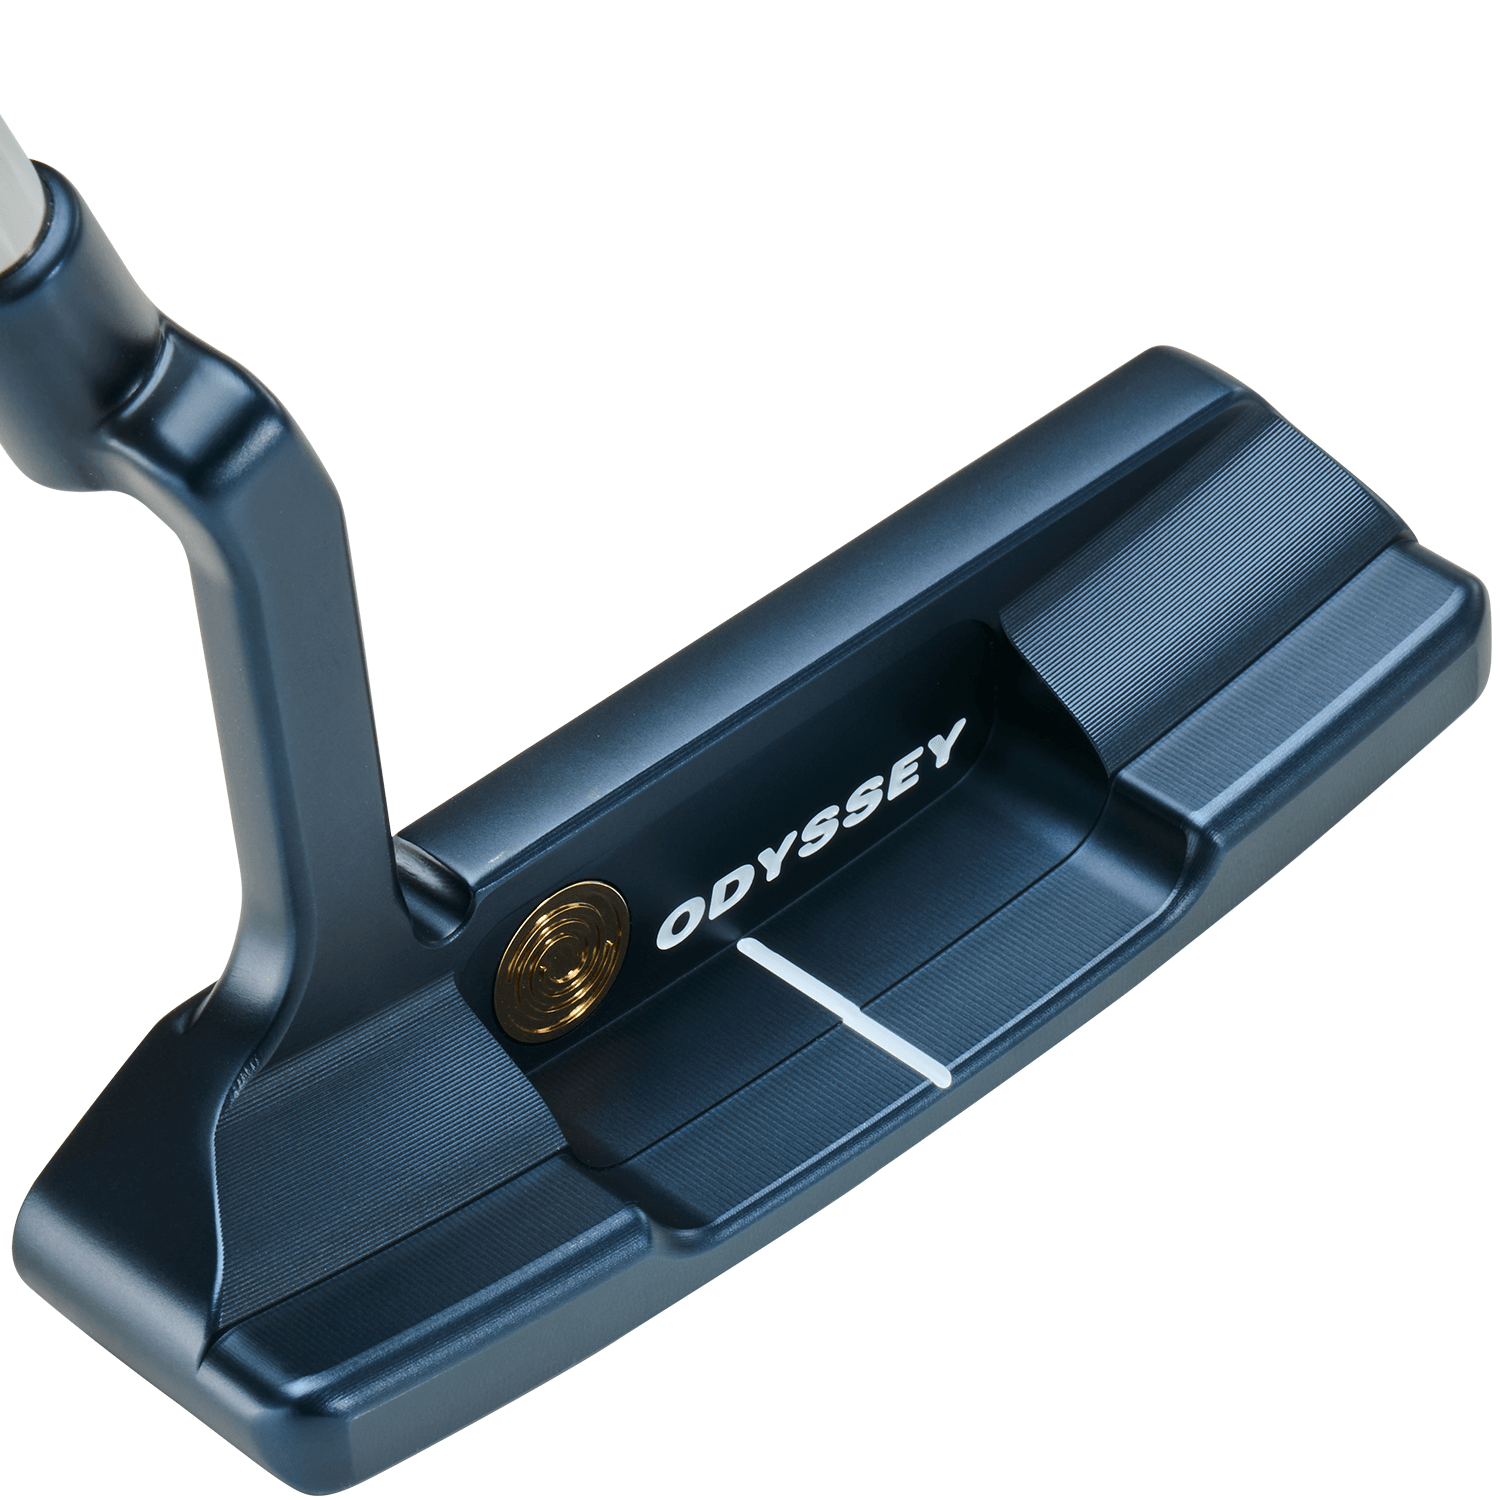 Odyssey Ai-ONE Milled Two T Golf Putter (Custom)